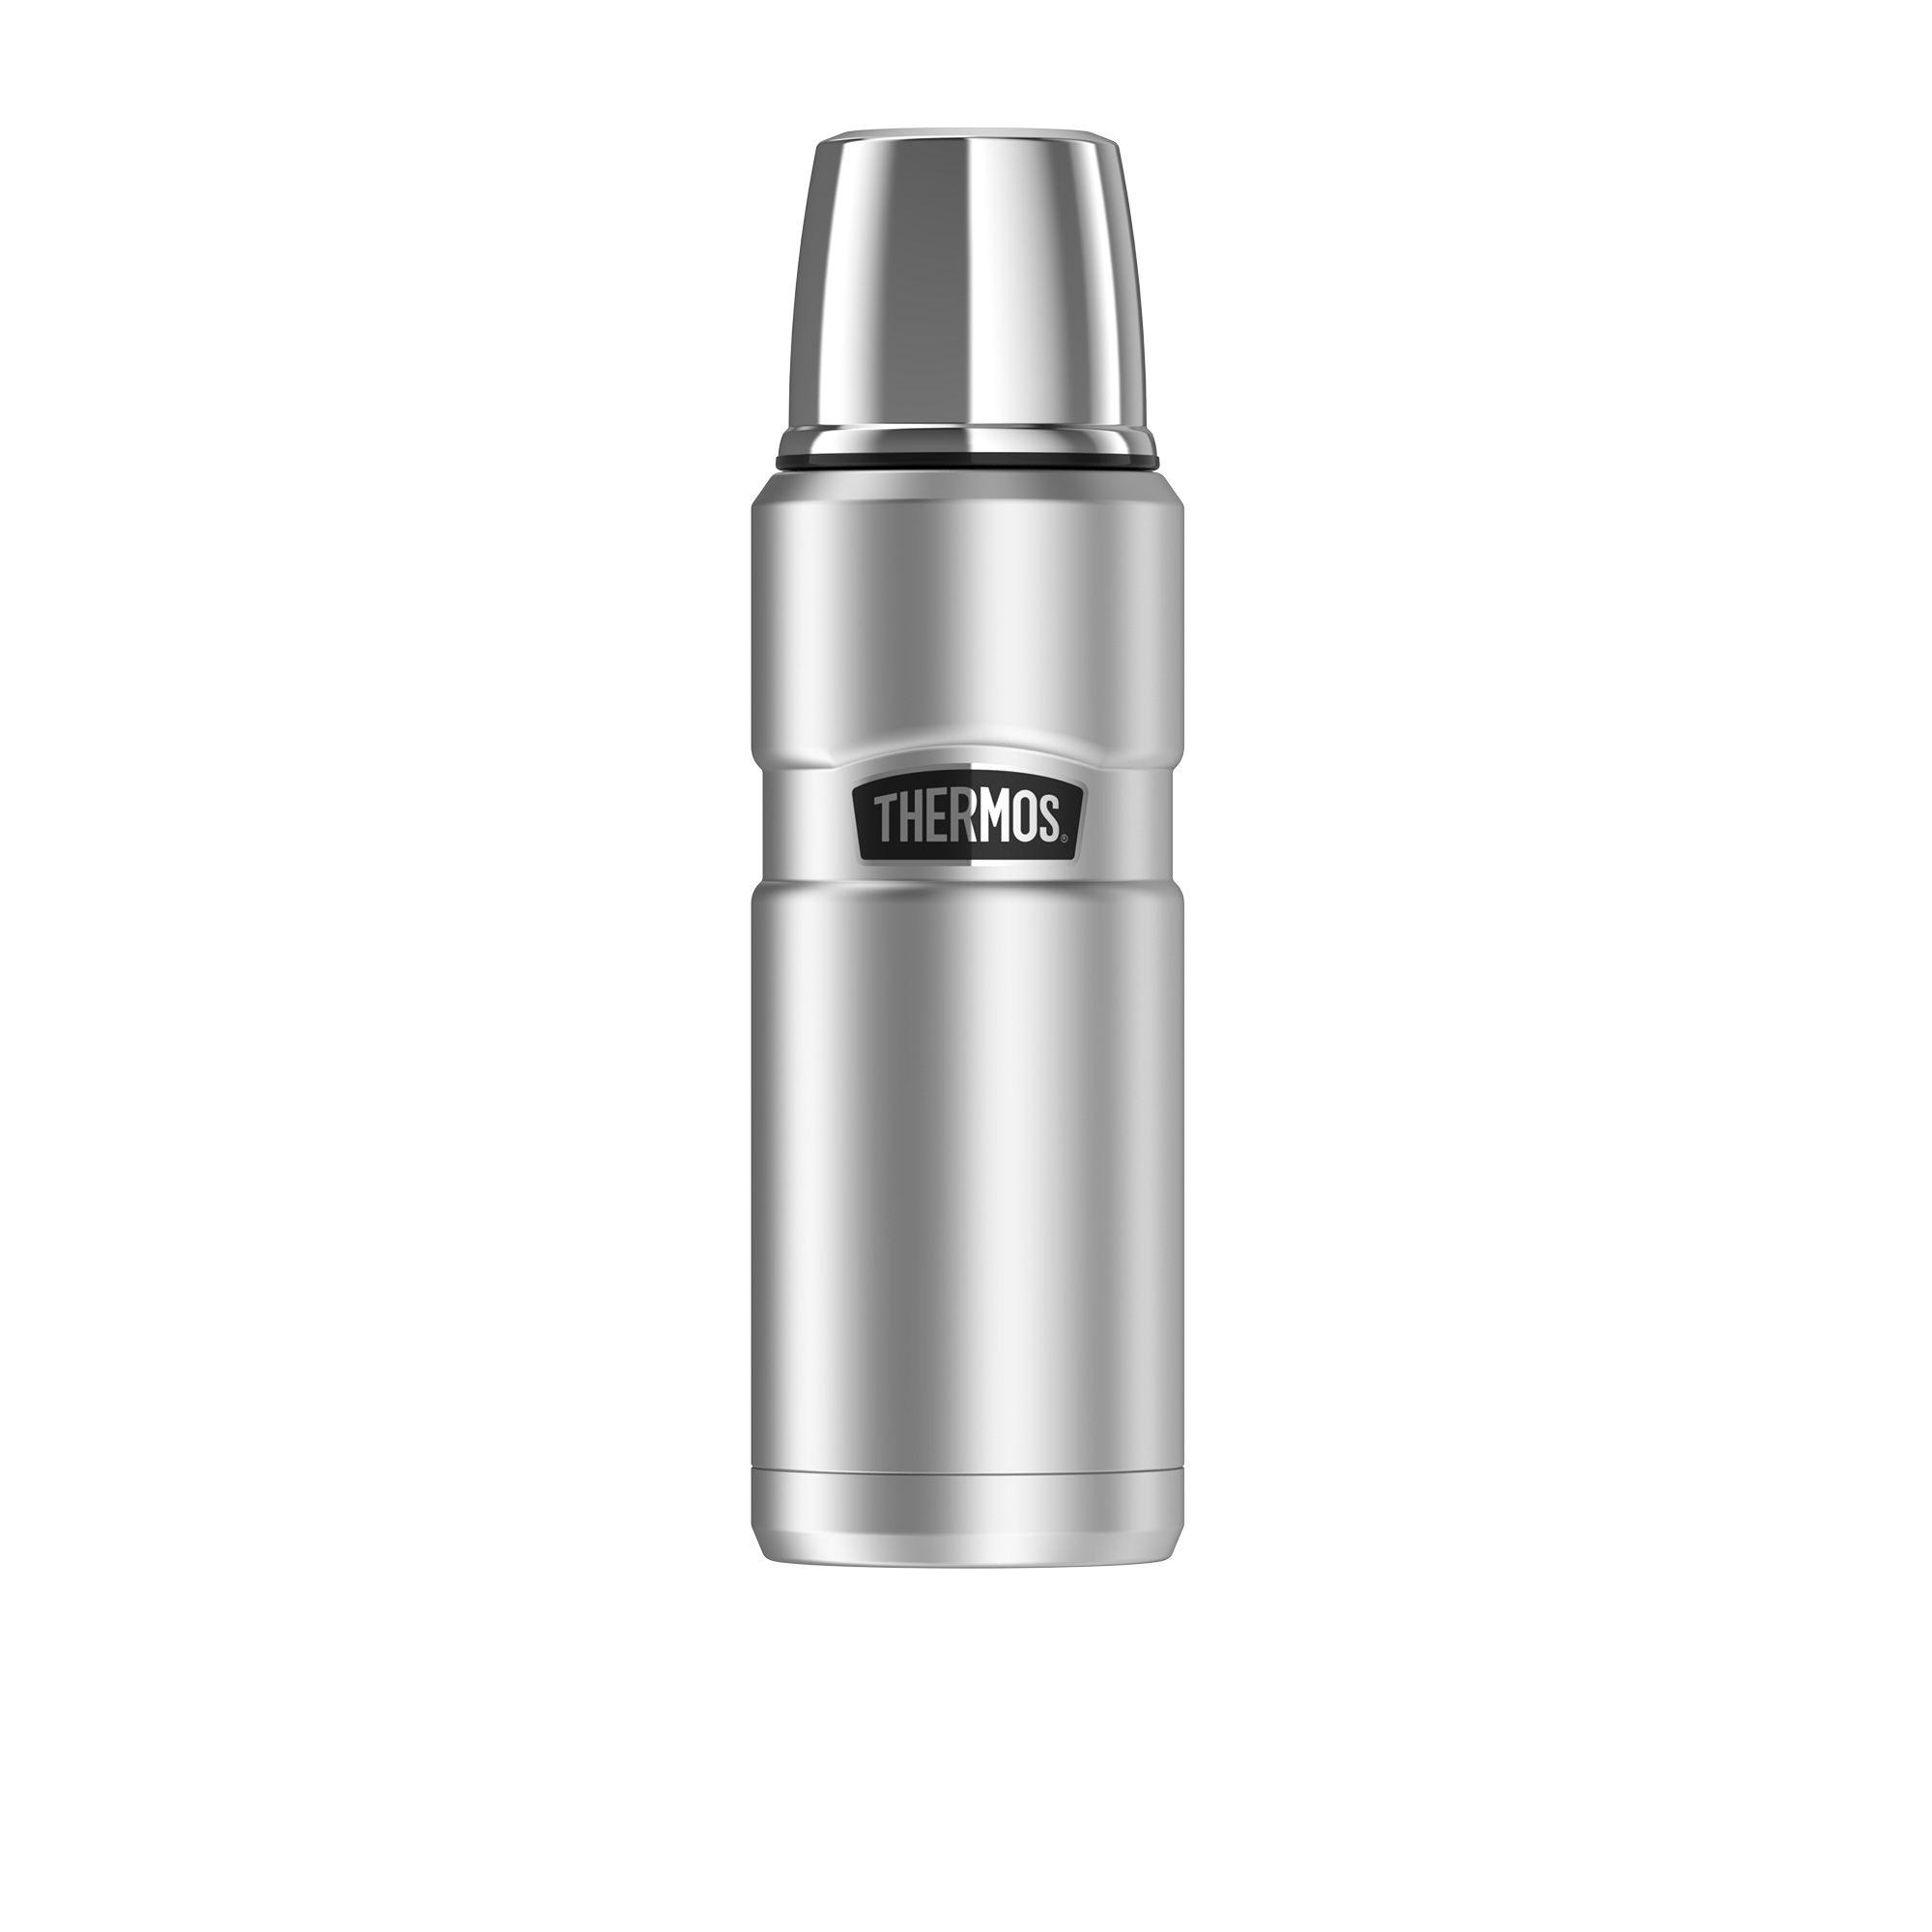 Thermos Stainless King Insulated Flask 470ml Stainless Steel Image 1